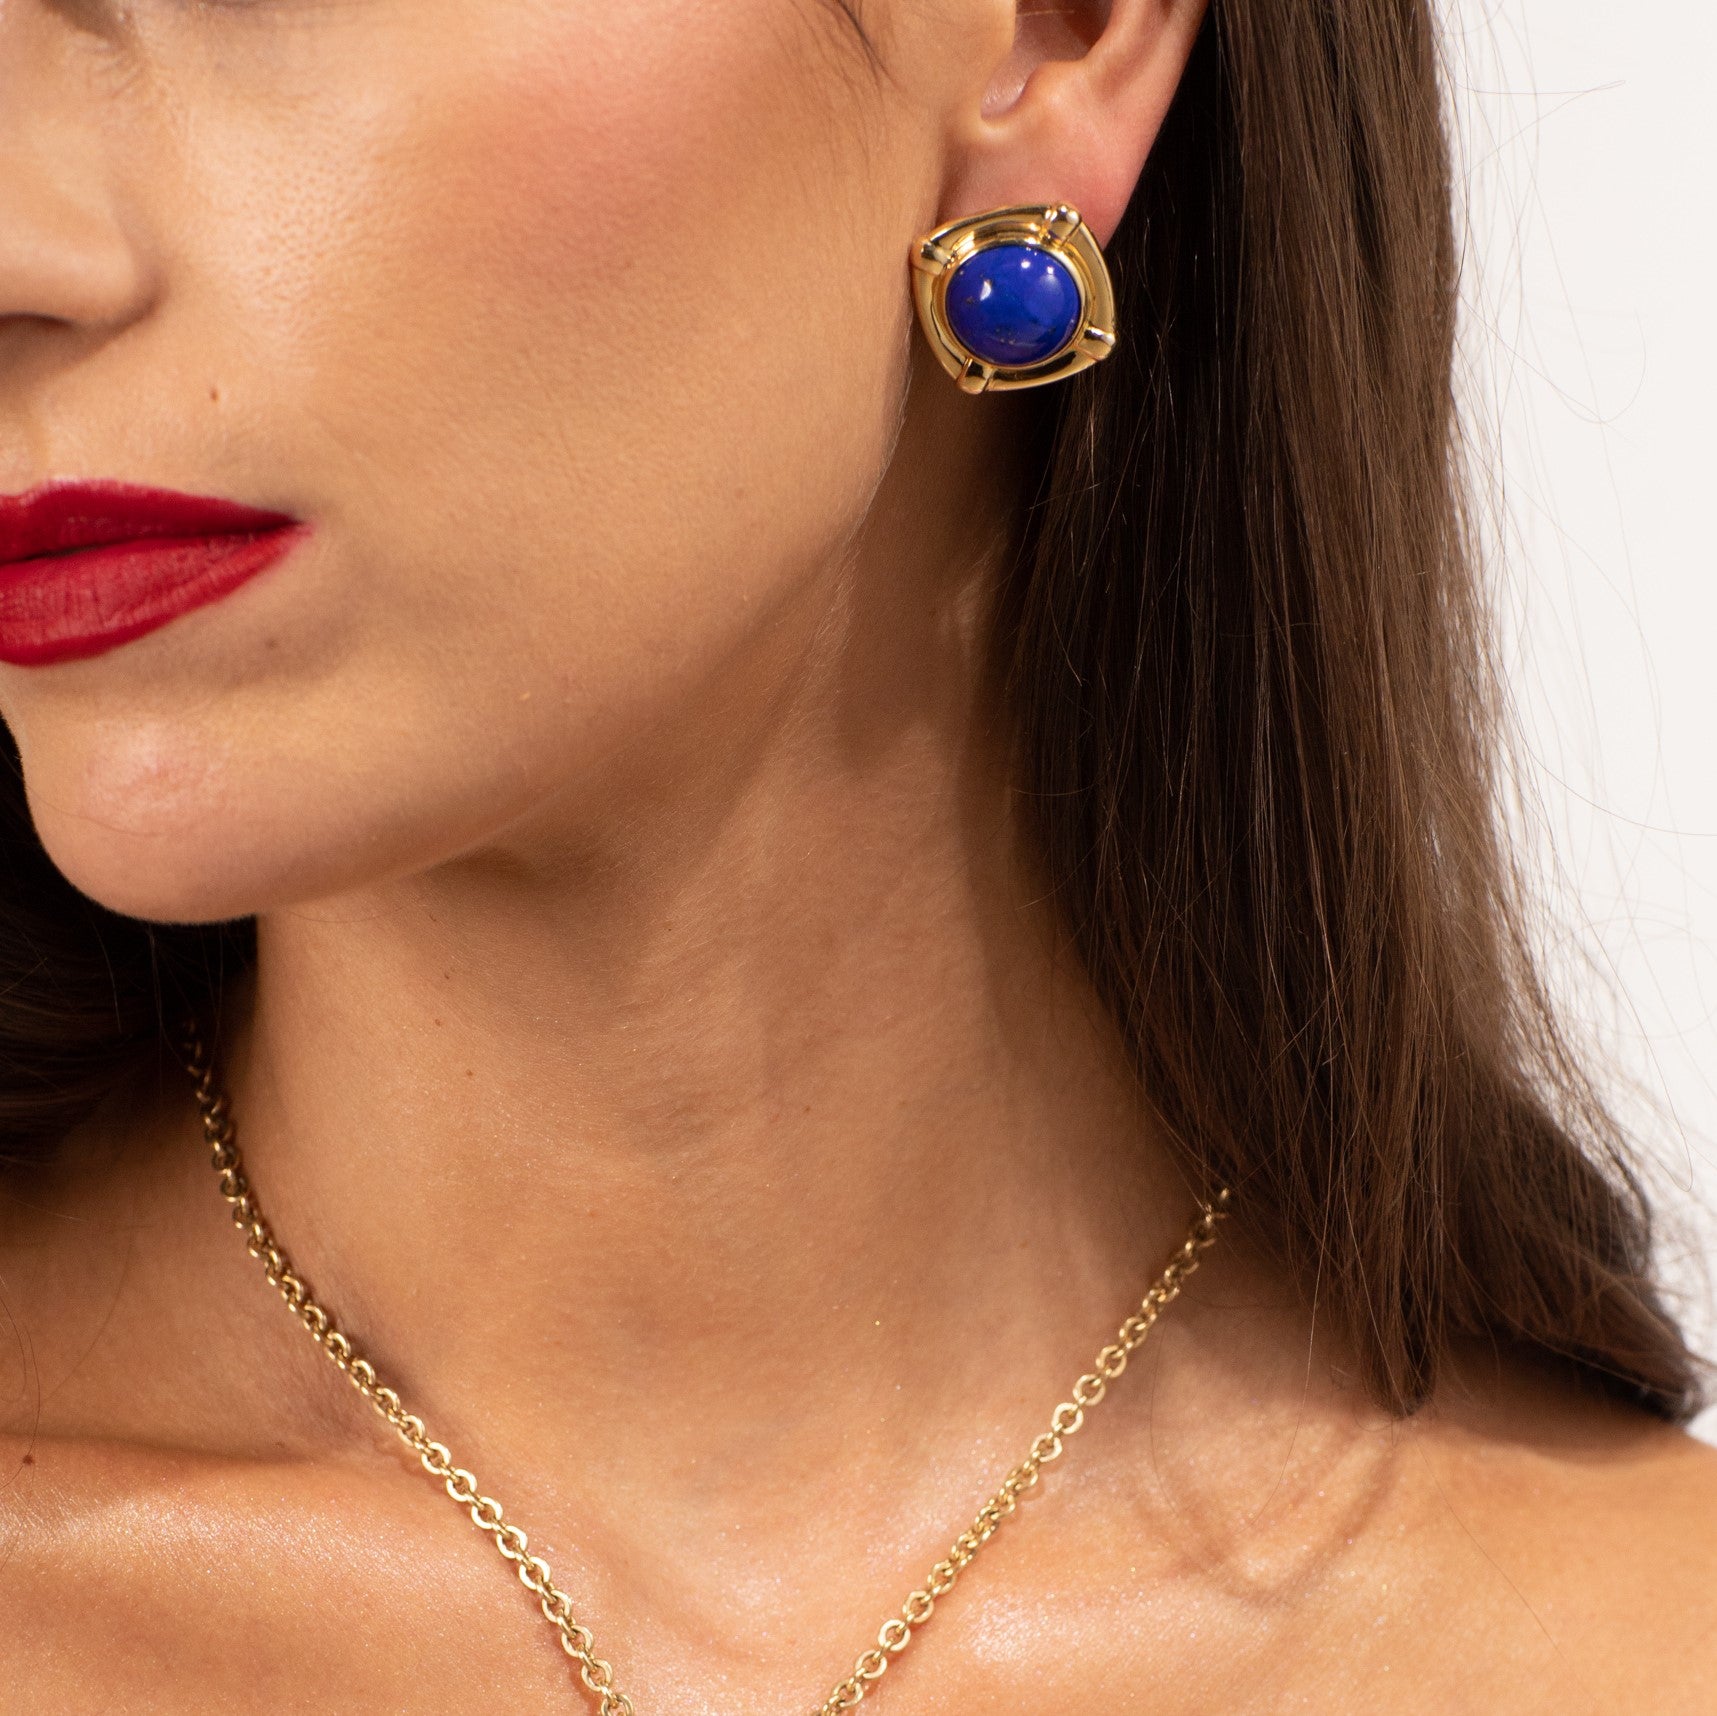 Woman wearing gold lapis lazuli earrings and gold chain necklace